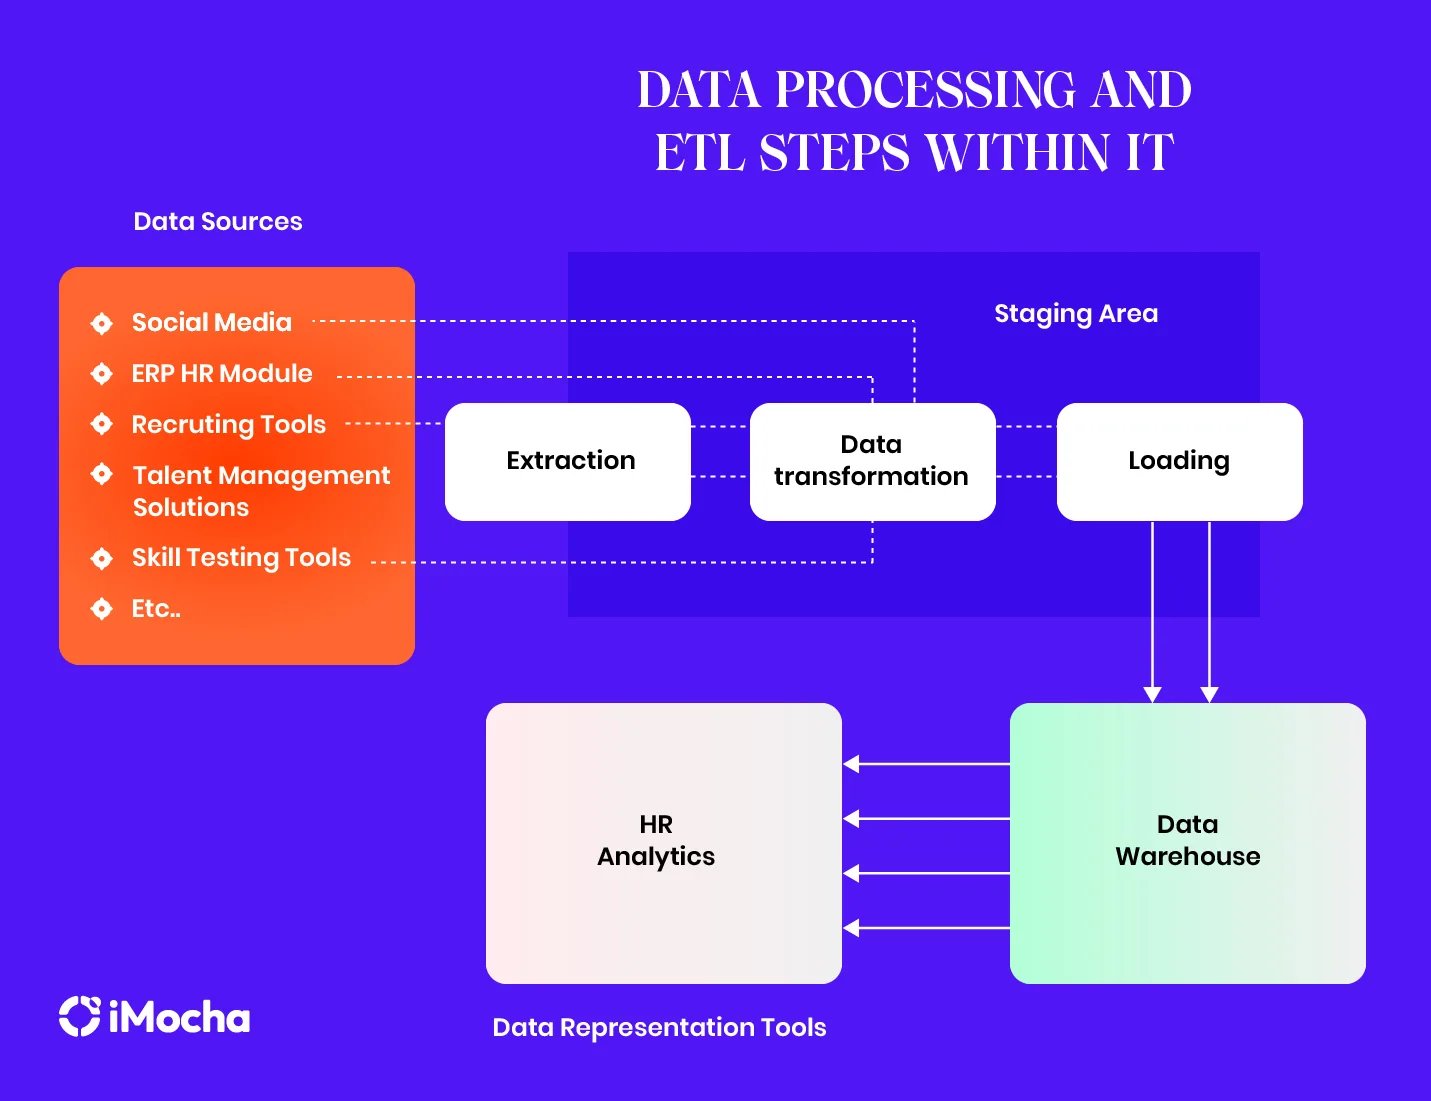 Data processing and ETL steps within IT